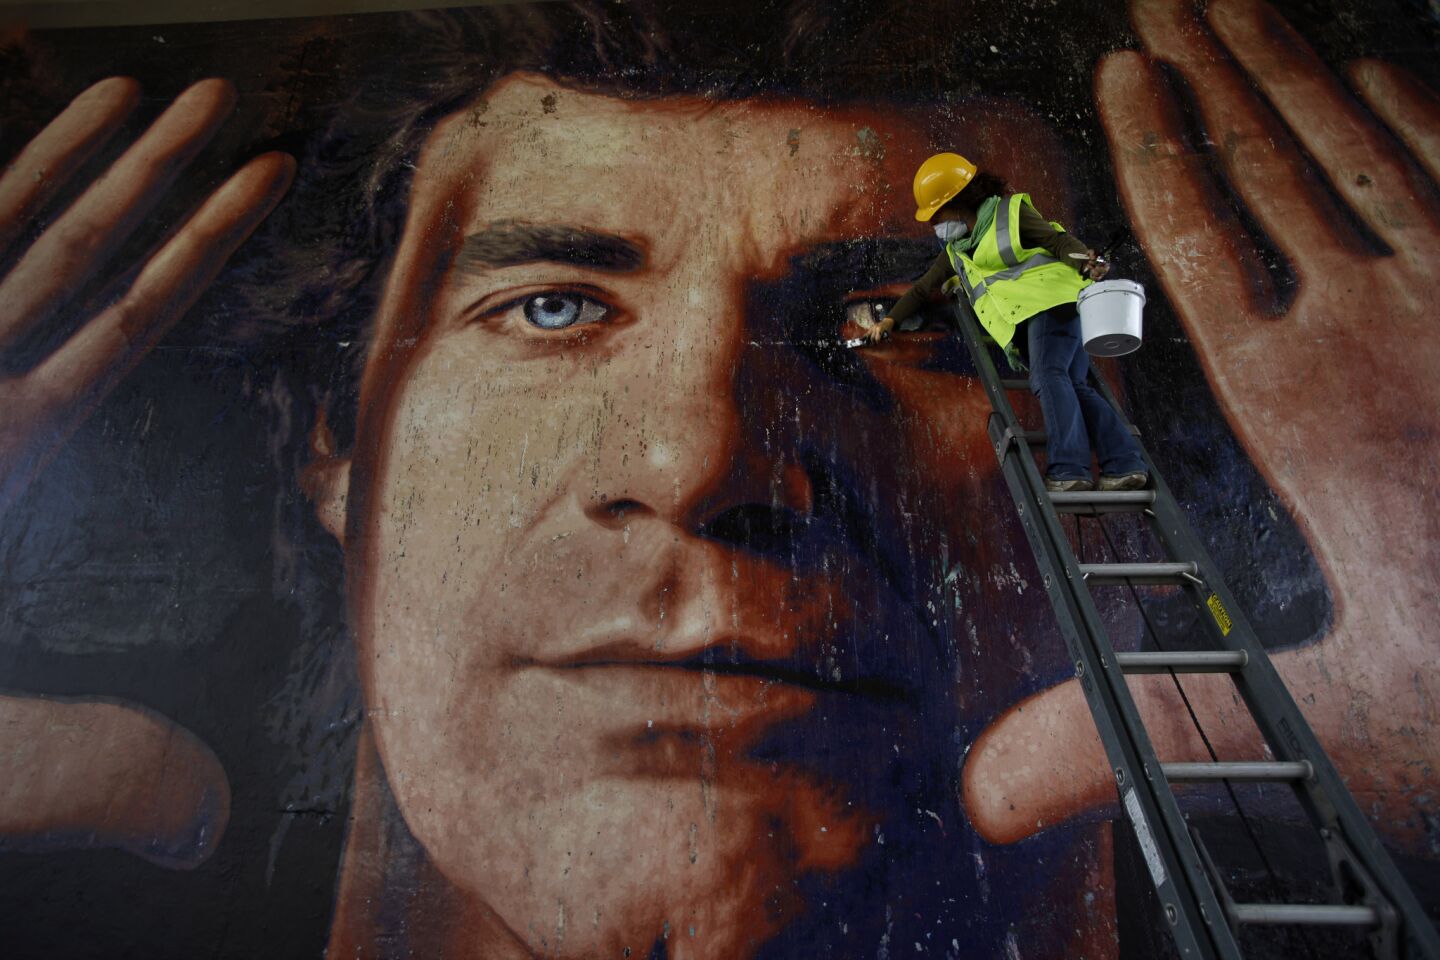 Virginia Panizzon, working with Save Freeway Murals in 2011, touches up Kent Twitchell's 1984 mural of art teacher Jim Morphesus. The mural, located along the Hollywood Freeway below the Grand Street overpass, had been defaced by graffiti.